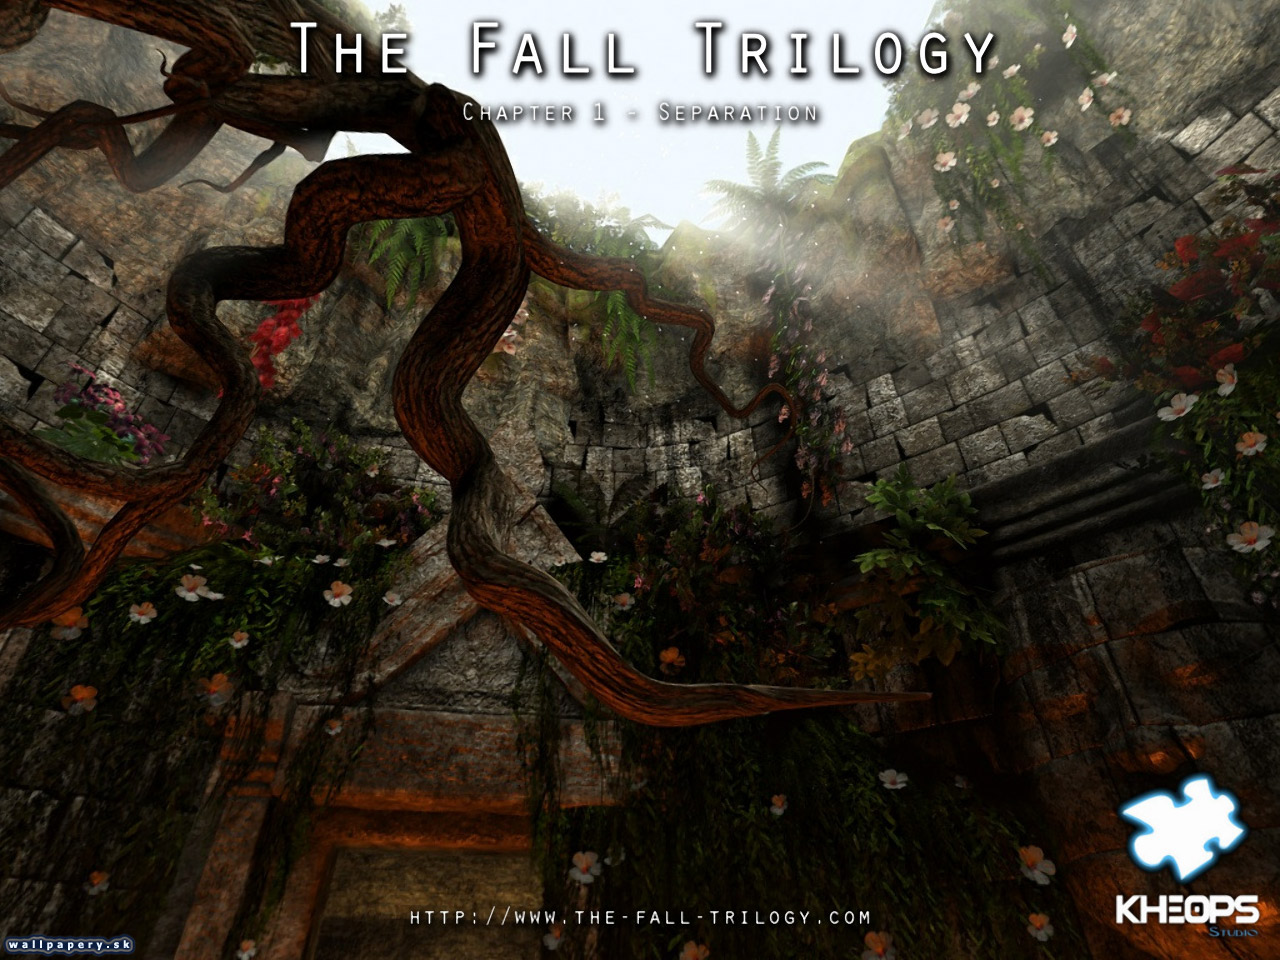 The Fall Trilogy - Chapter 1: Separation - wallpaper 2